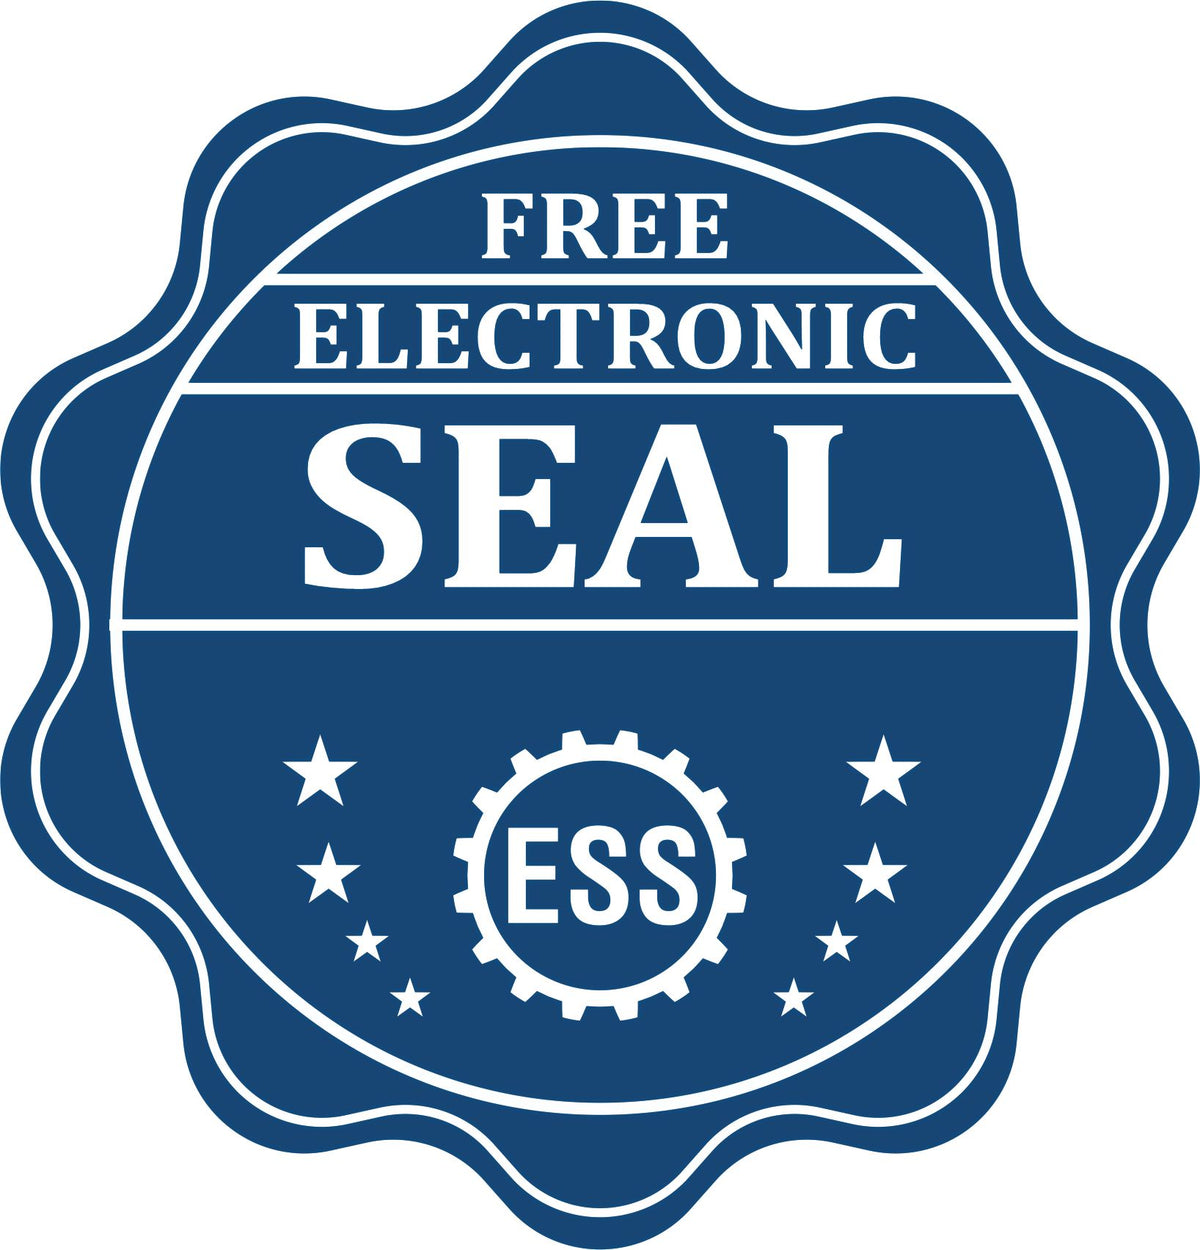 A badge showing a free electronic seal for the Tennessee Geologist Desk Seal with stars and the ESS gear on the emblem.